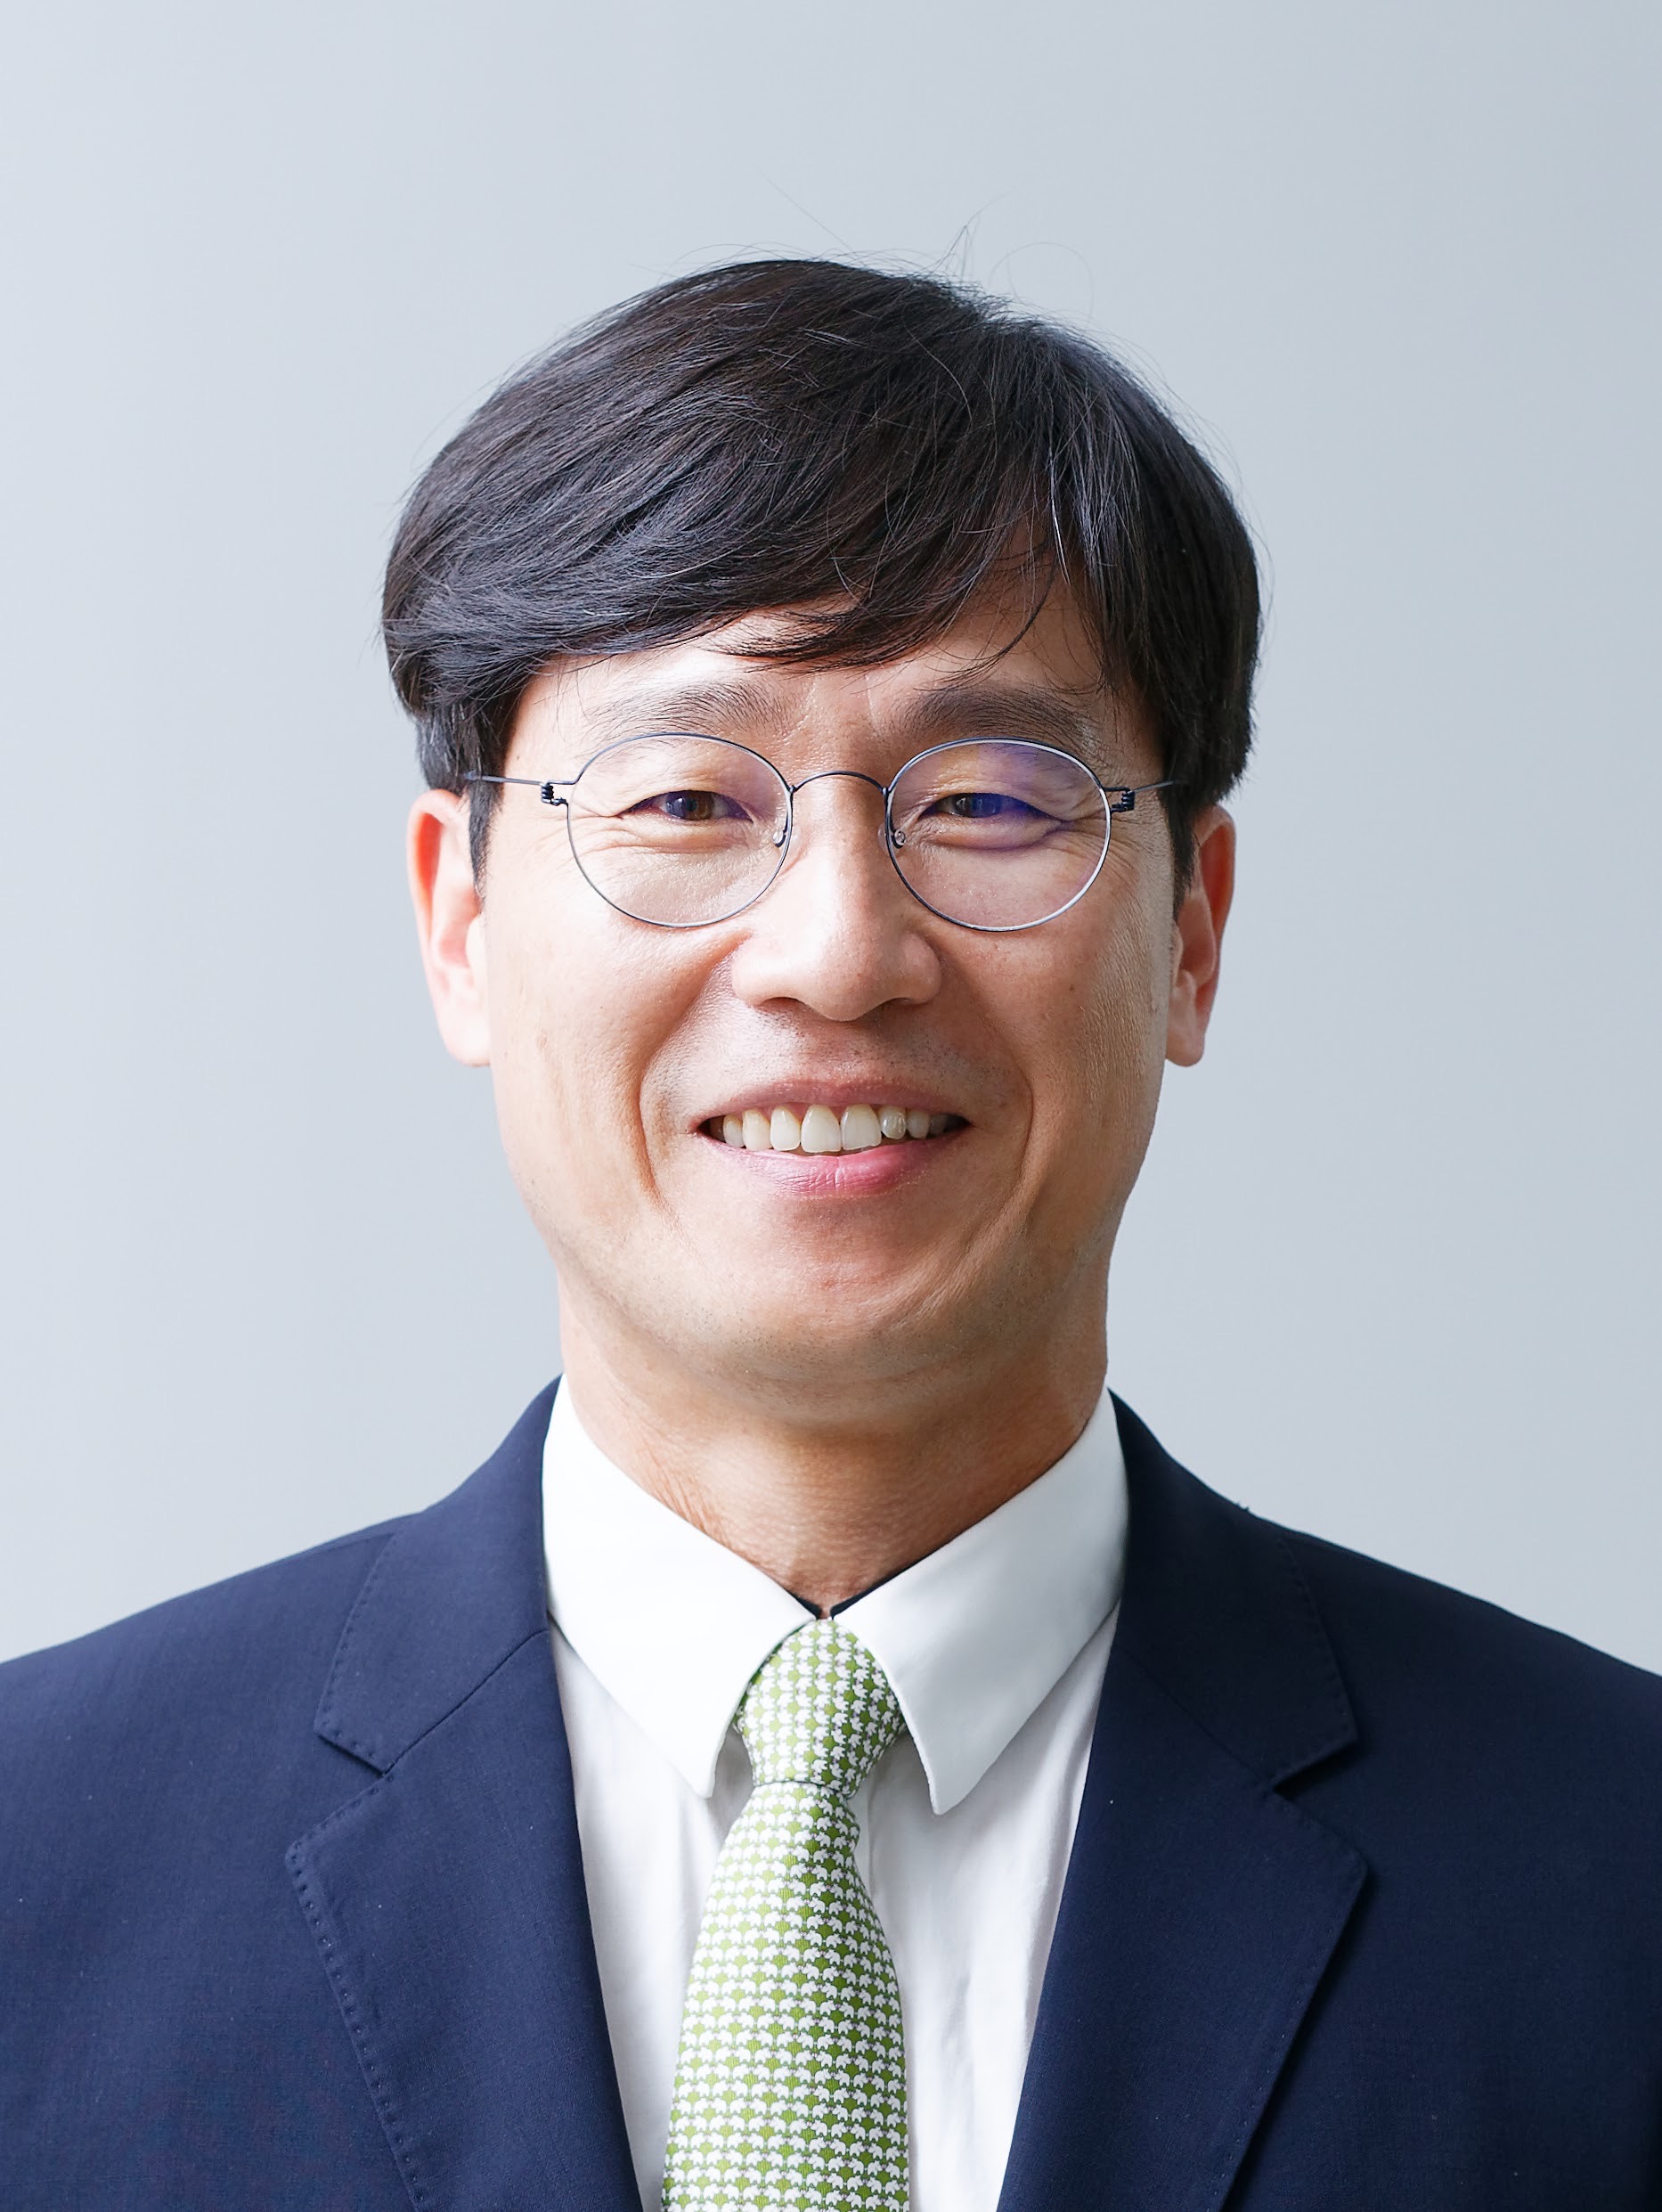 Kyoungwoo Lee 프로필 사진